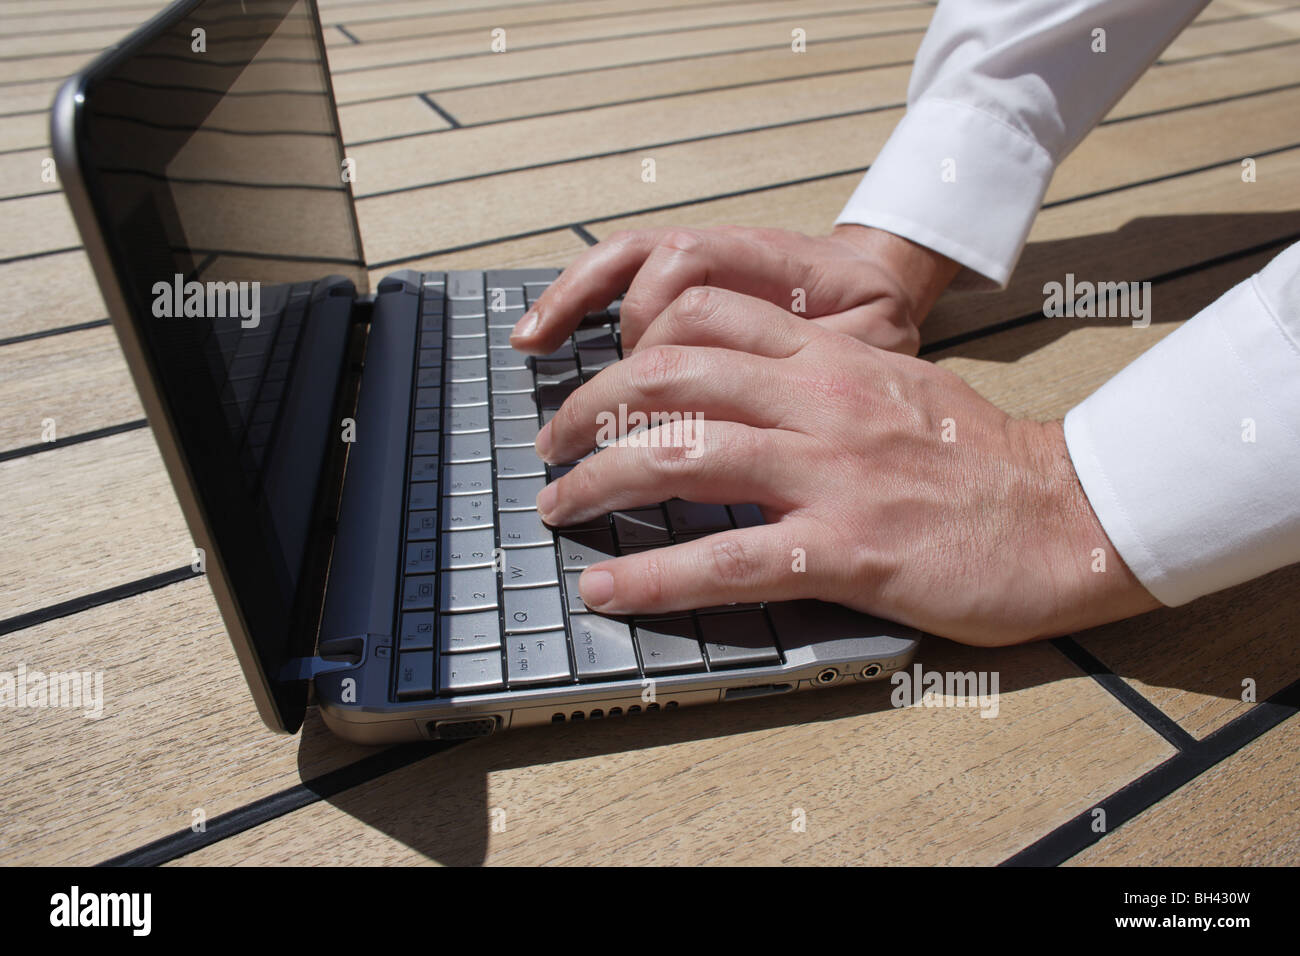 A man's hands working on a netbook computer on a wooden deck Stock Photo